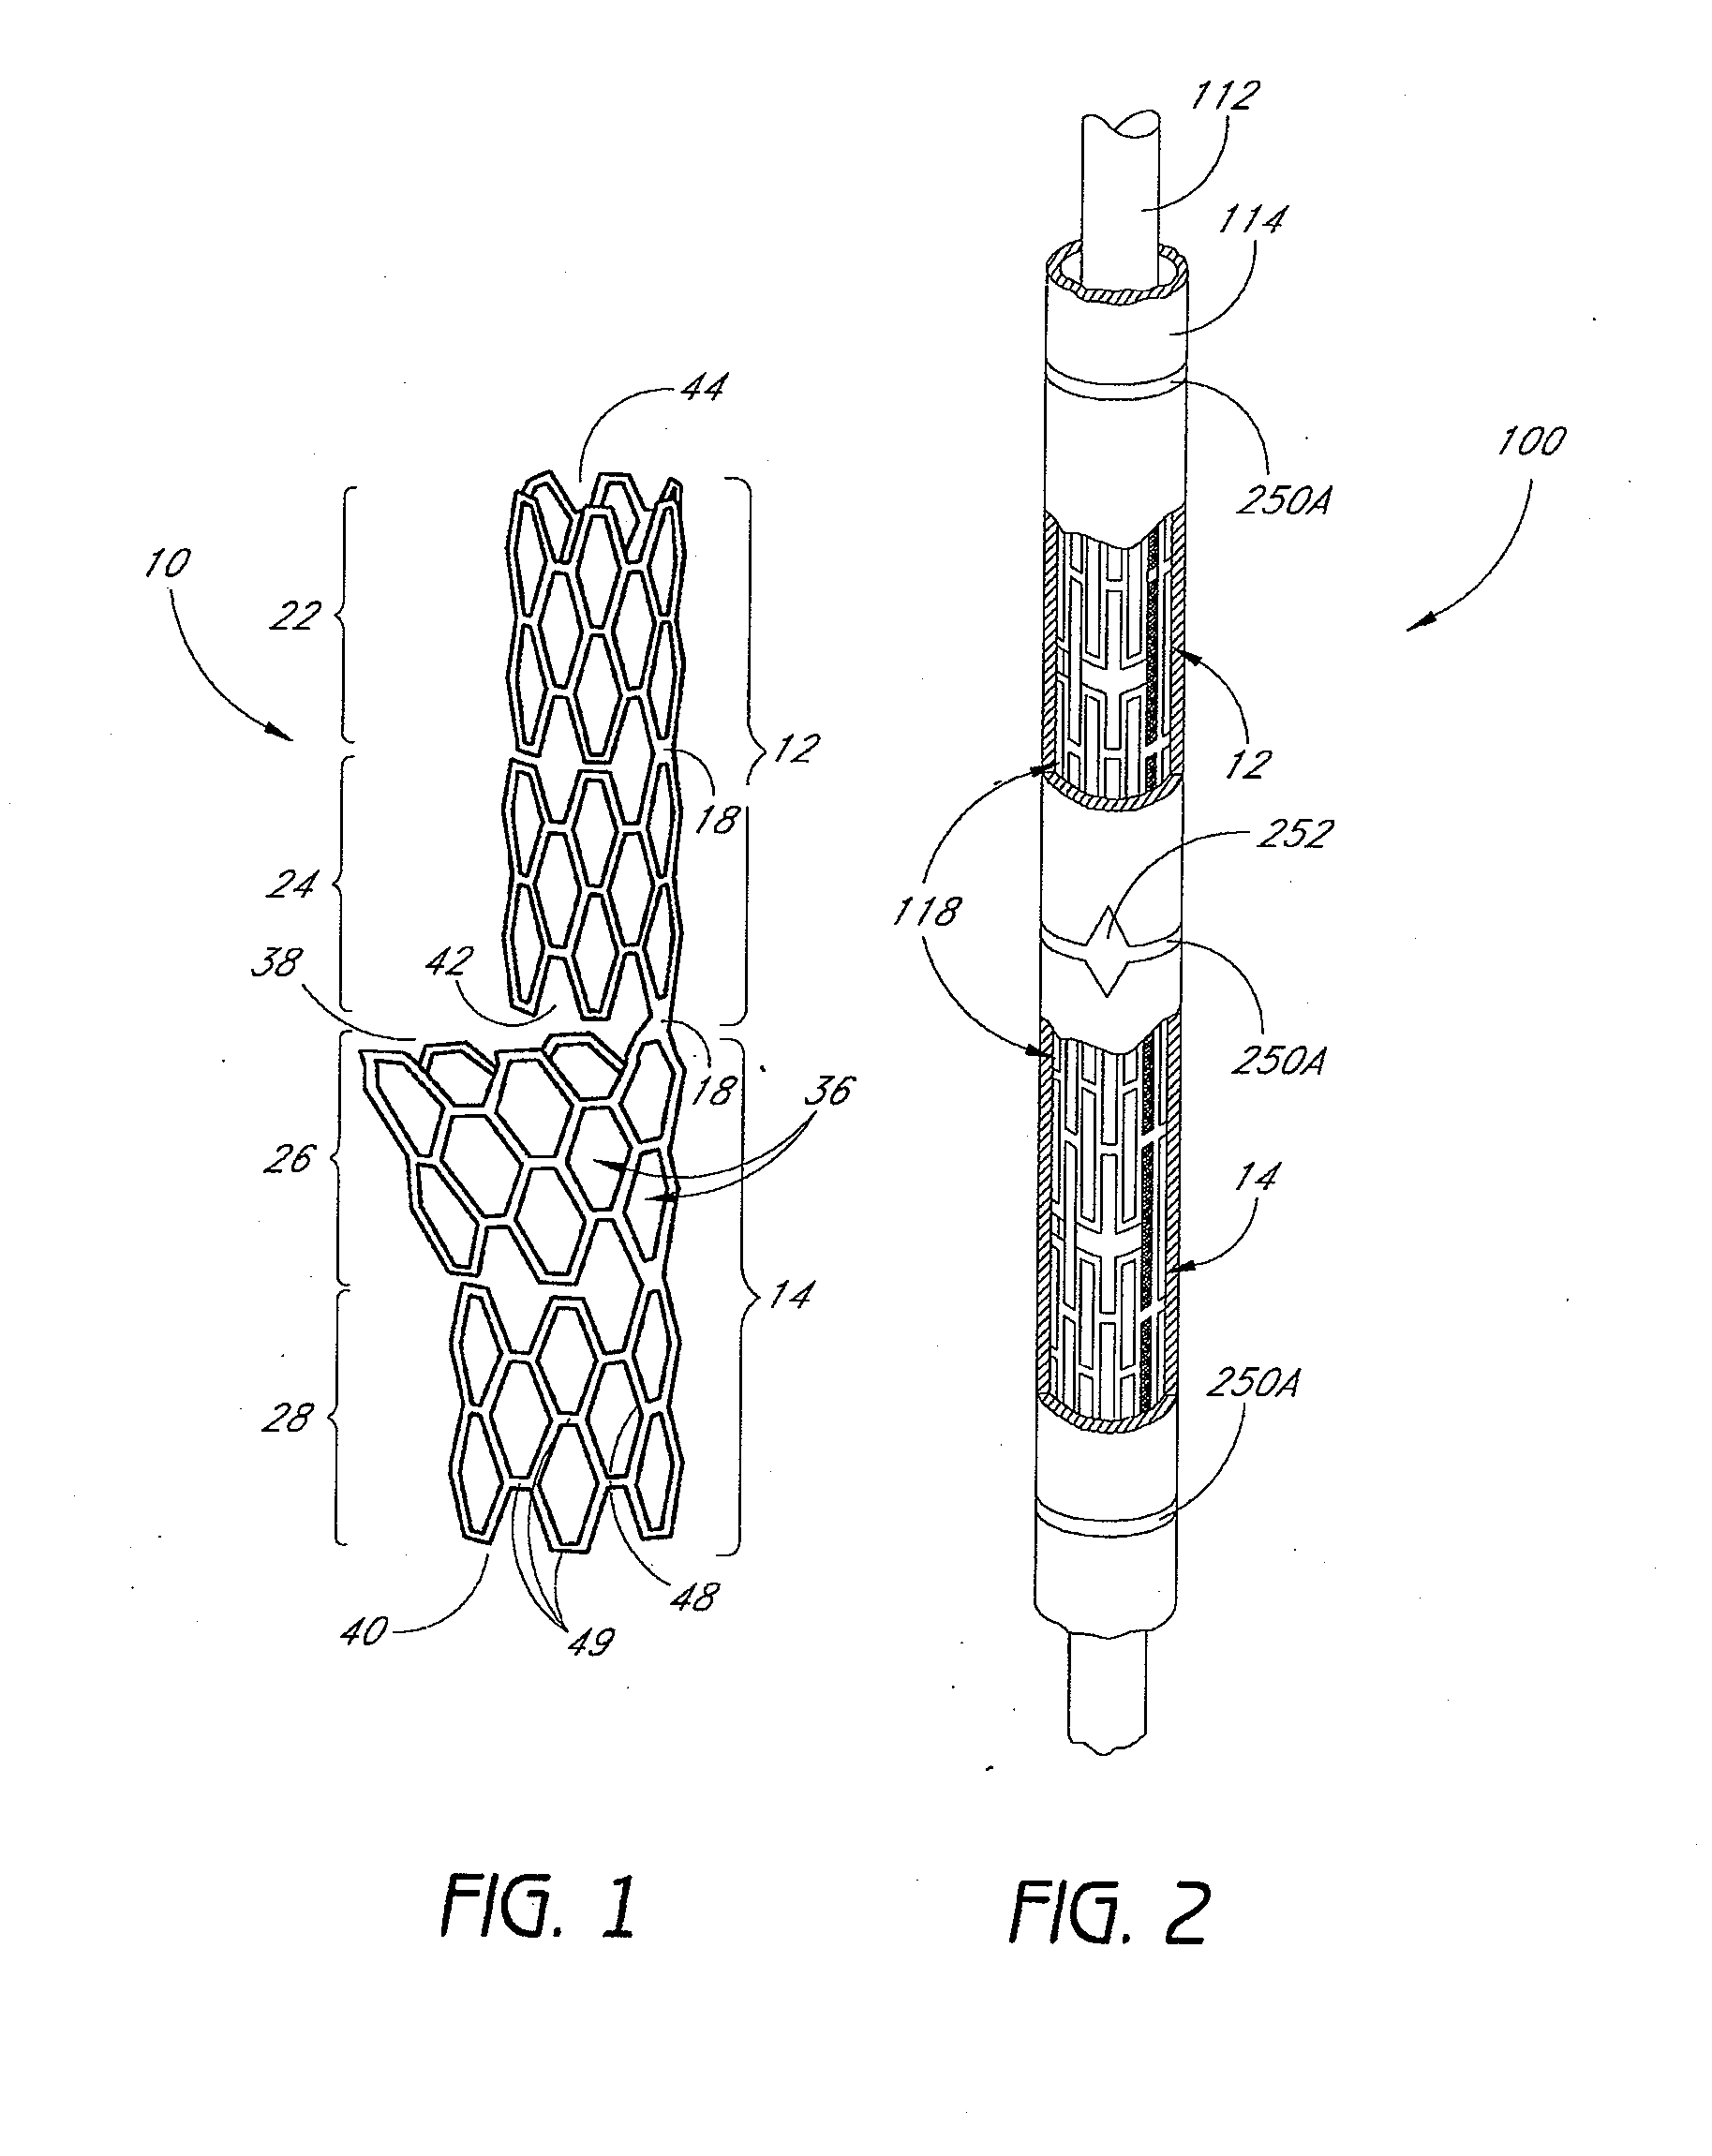 Bifurcation stent and method of positioning in a body lumen